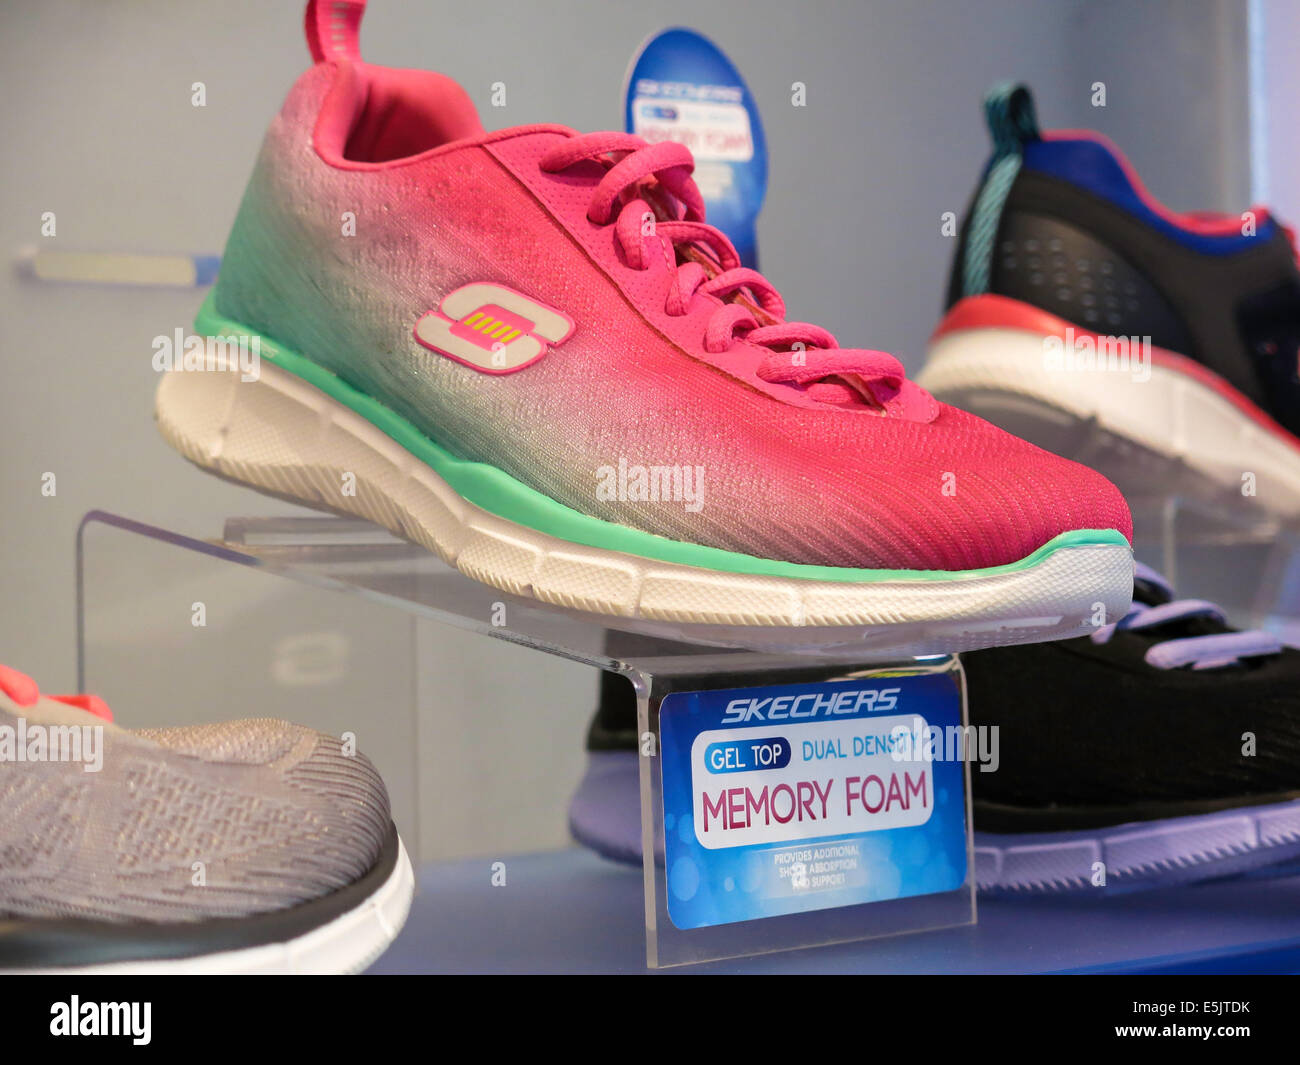 Luik Ontwikkelen Structureel Skechers Shoe Shop High Resolution Stock Photography and Images - Alamy